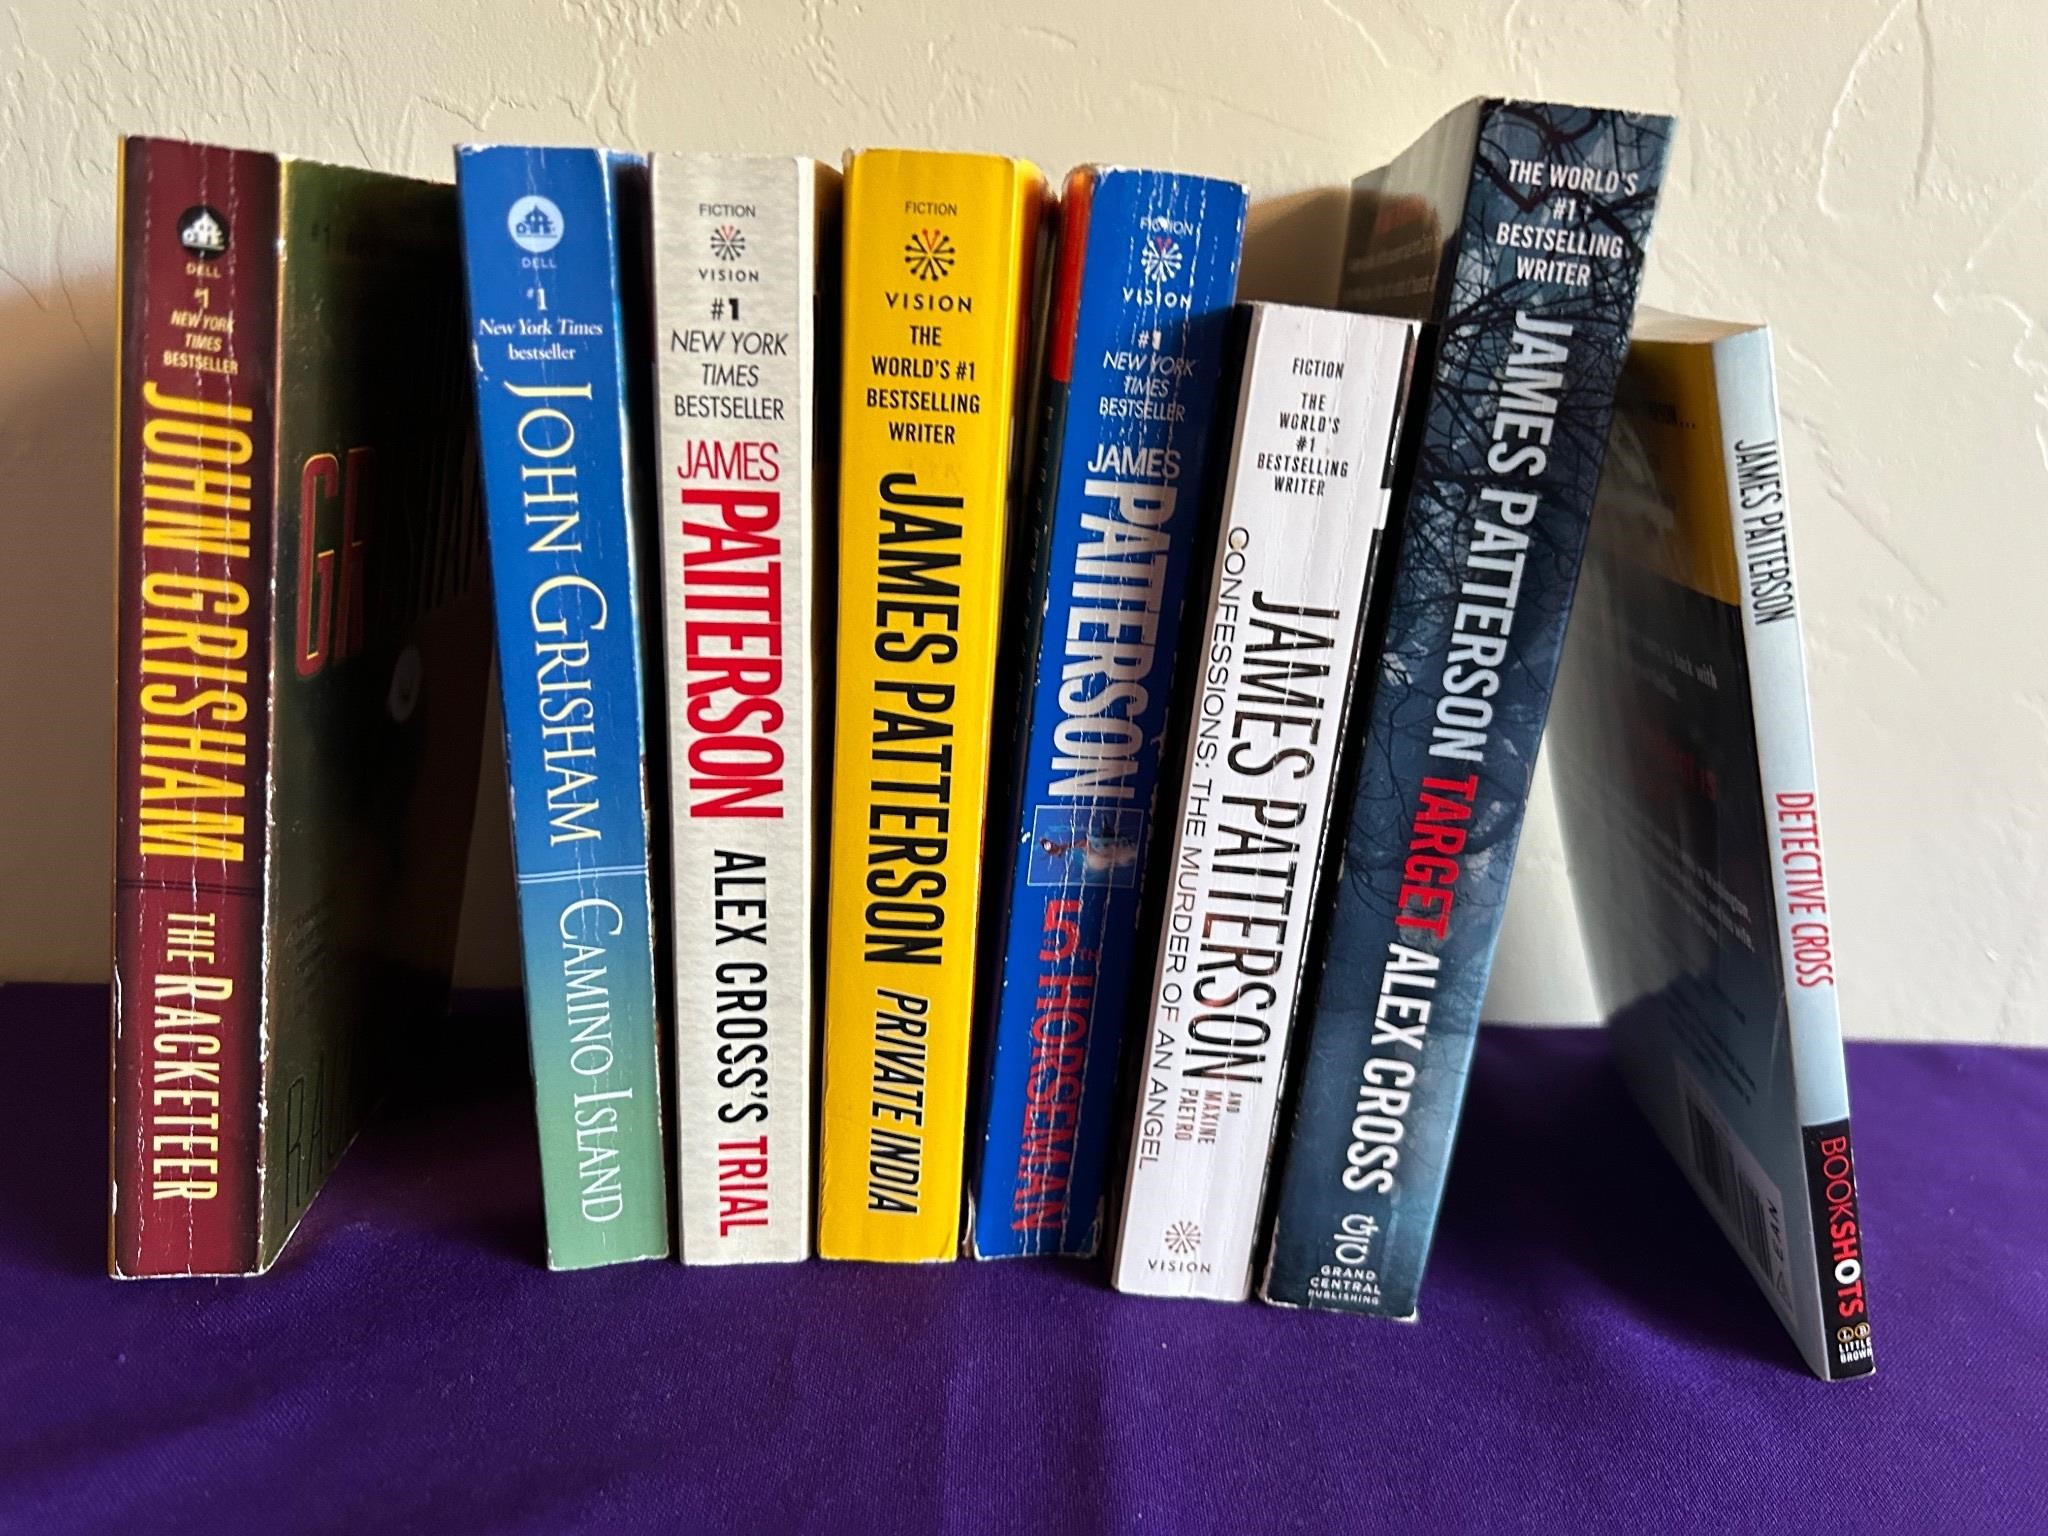 Vince Flynn Bestselling Books Collection